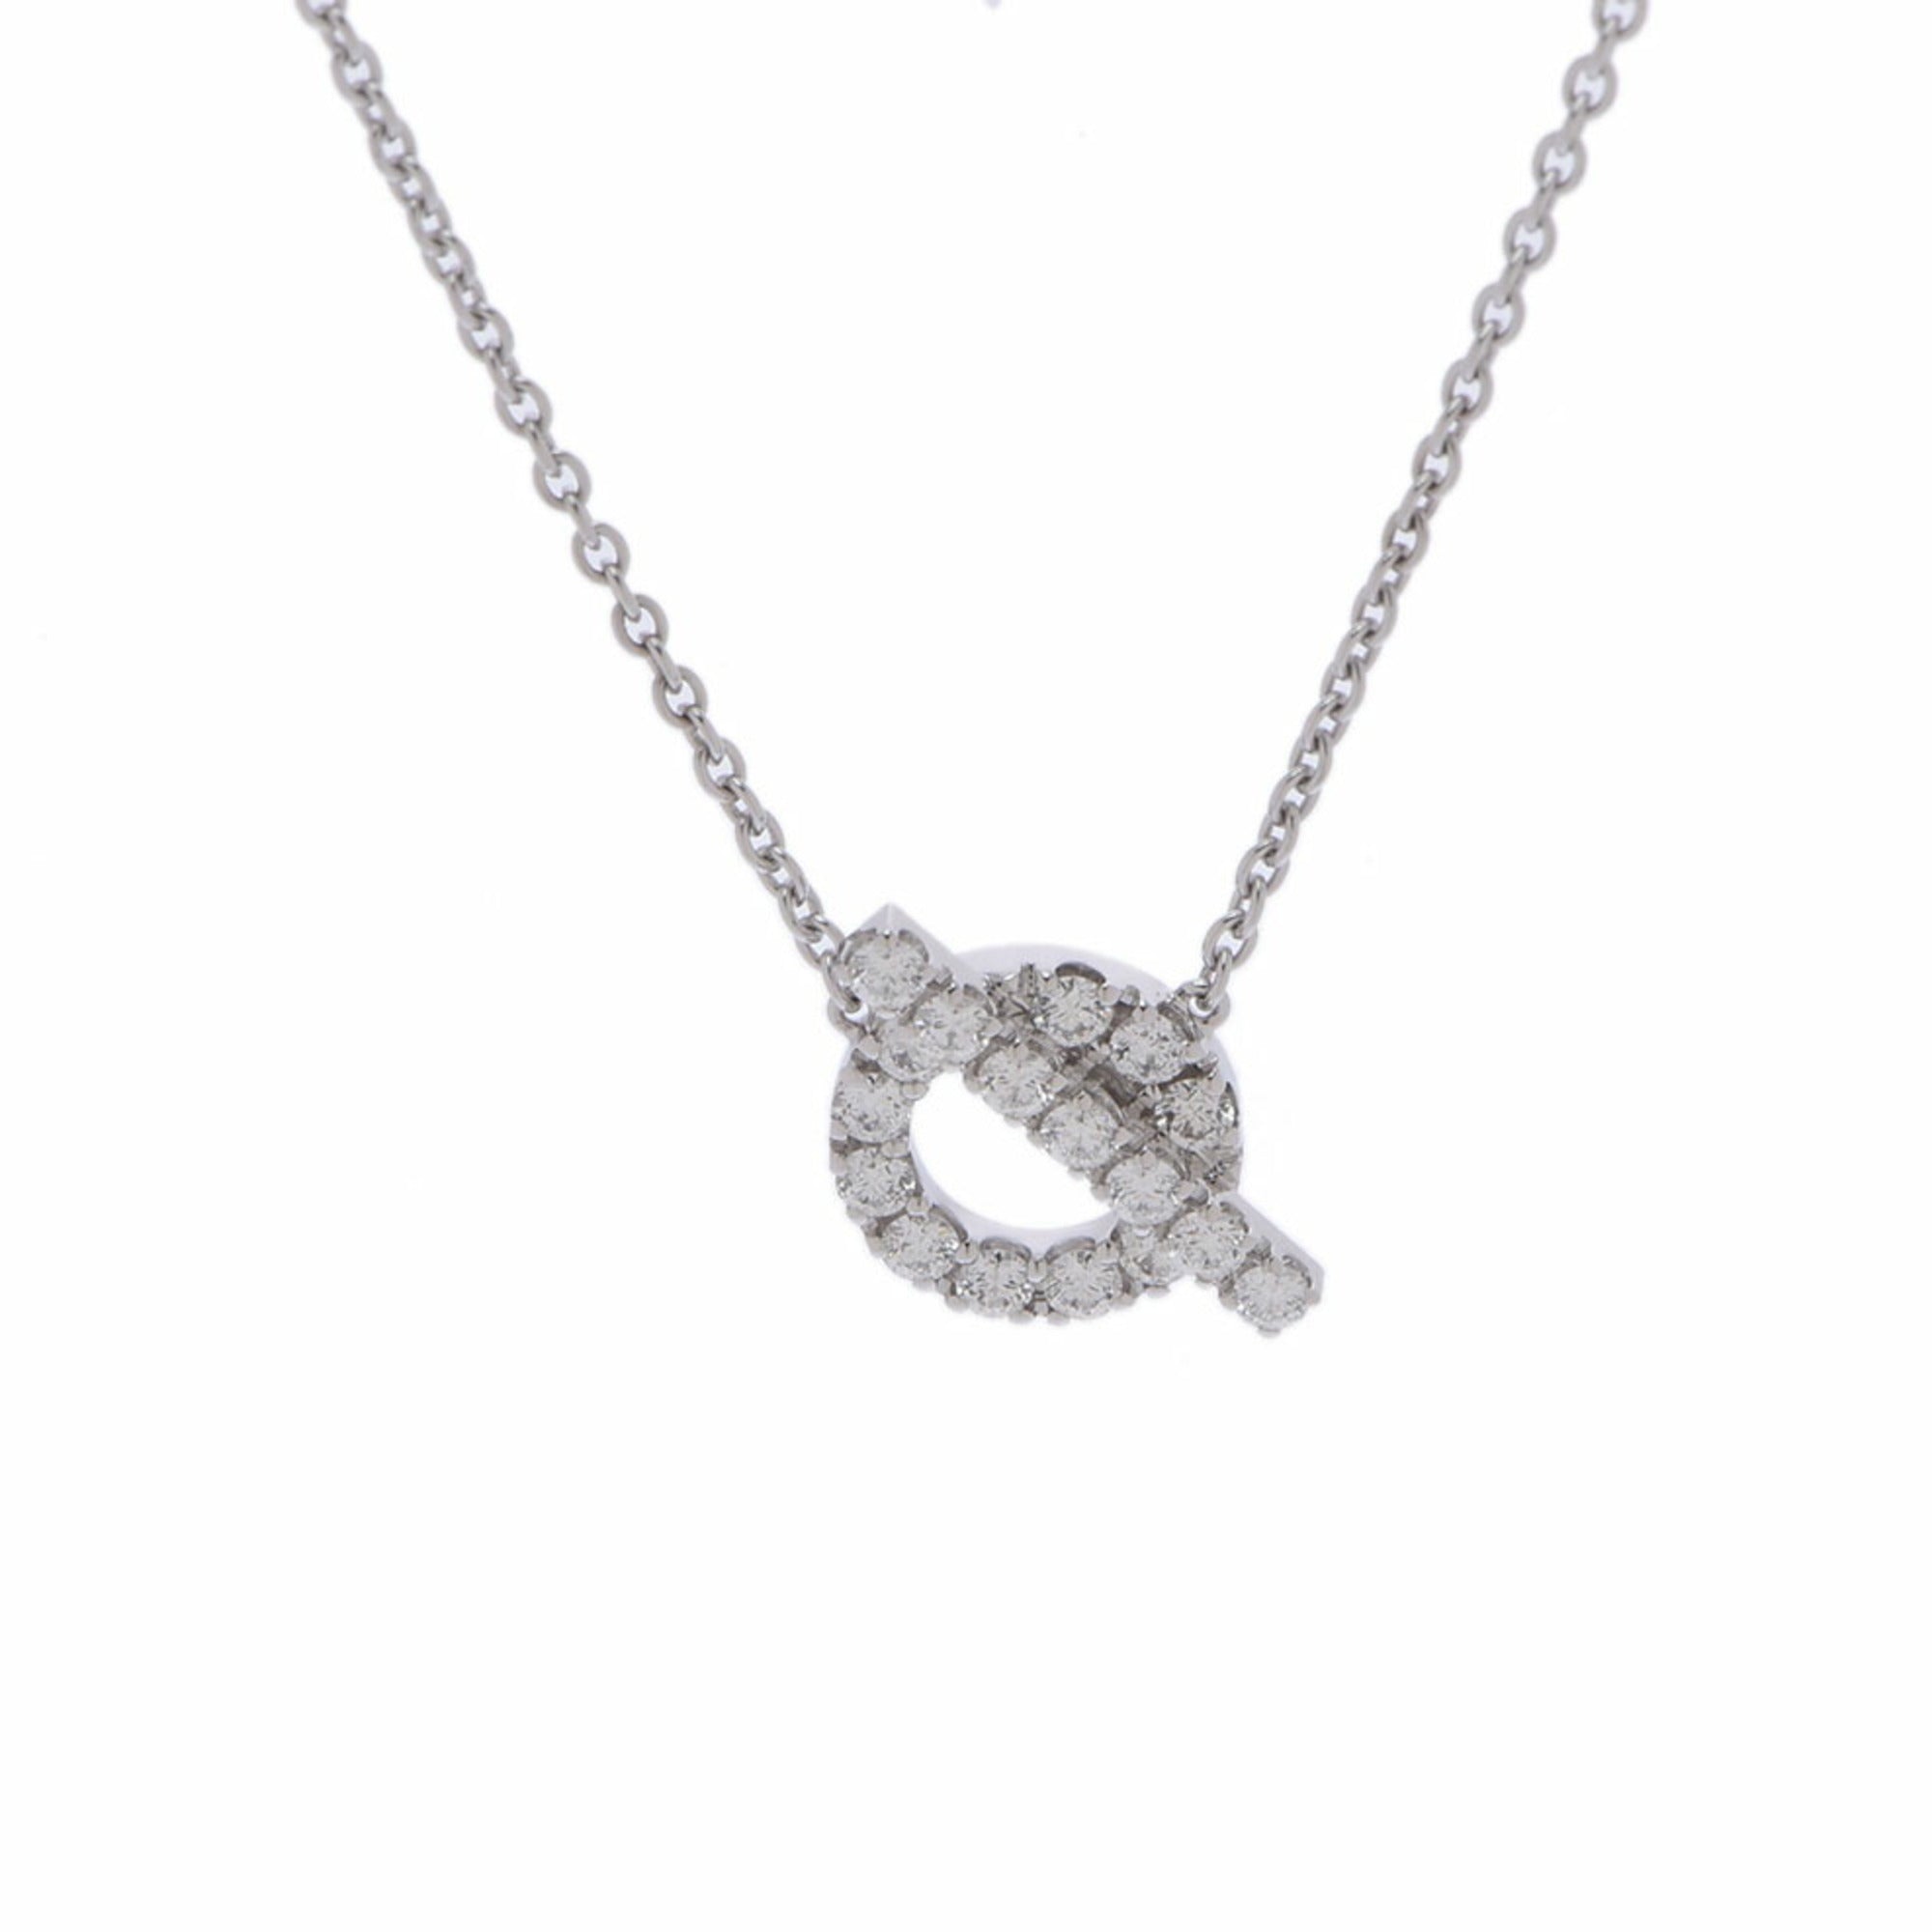 HERMES 18K玫瑰金Finesse necklace 6.02ct鑽石項鍊– Brand Off Hong Kong Online Store